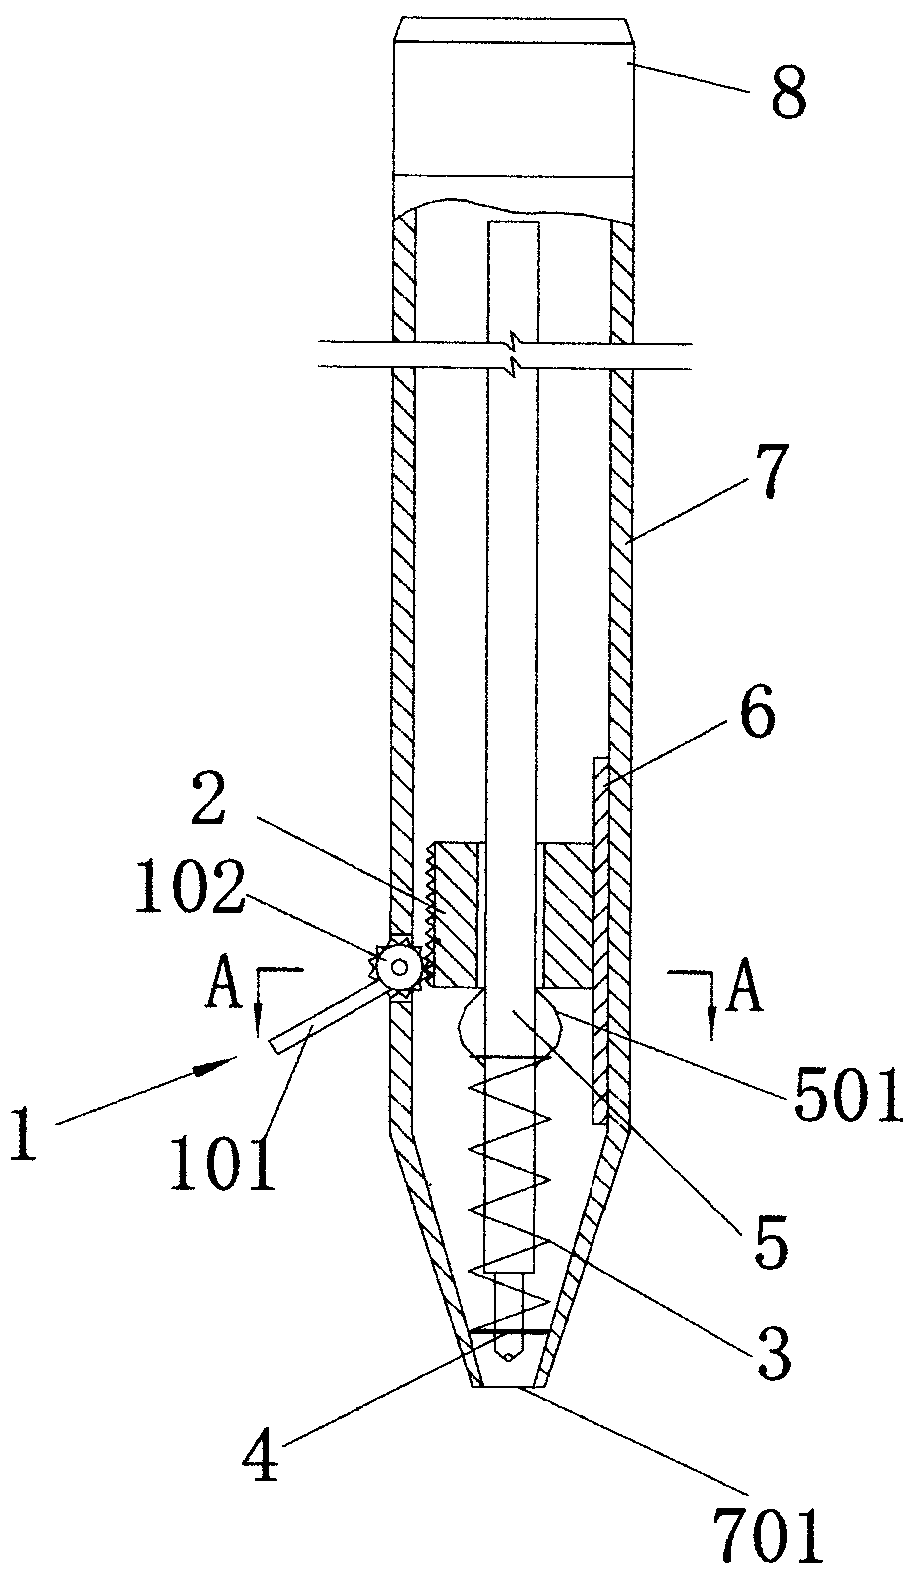 Dropping-resisting pen with pen point capable of automatically retracting